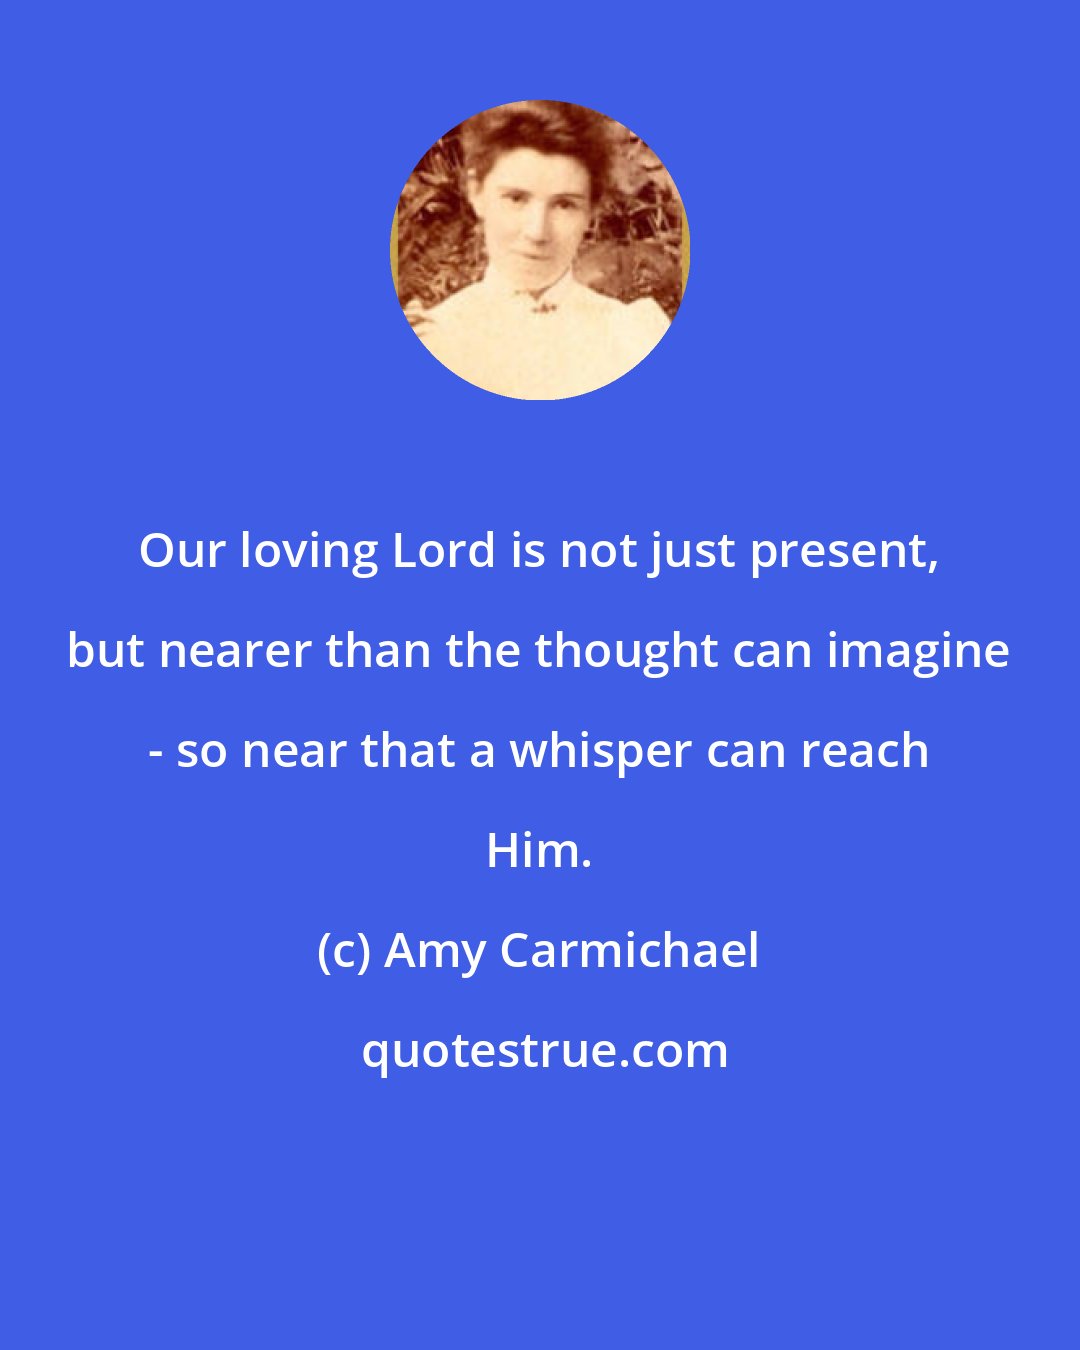 Amy Carmichael: Our loving Lord is not just present, but nearer than the thought can imagine - so near that a whisper can reach Him.